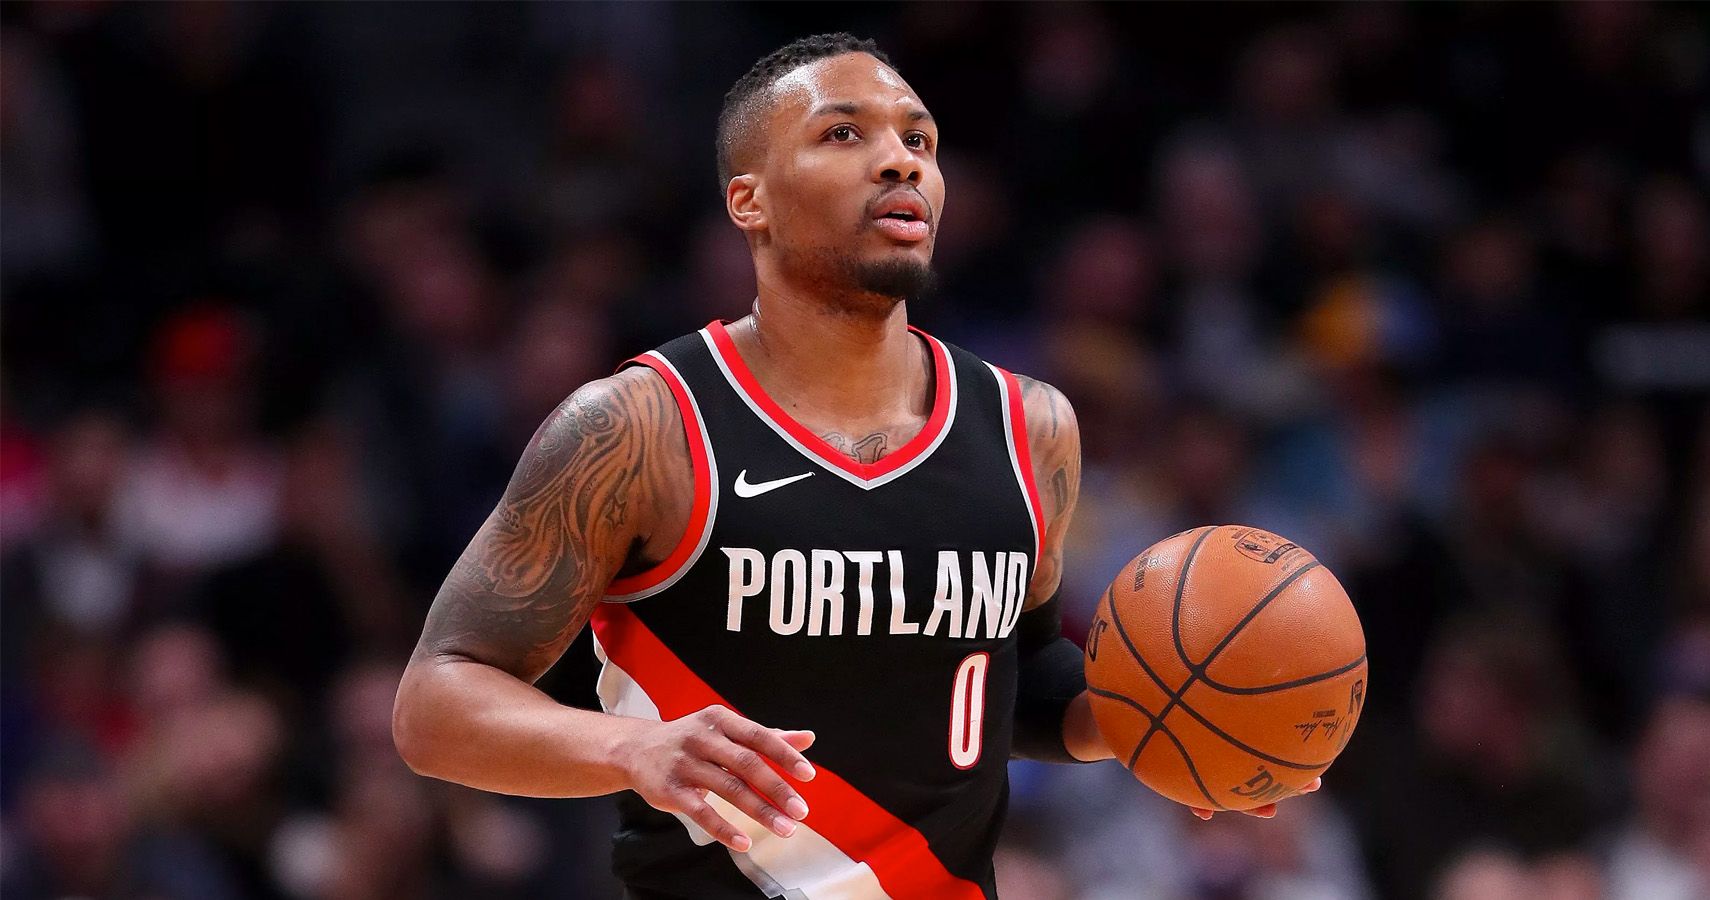 Damian Lillard Sets FranchiseRecord For Most 3Pointers In Single Game